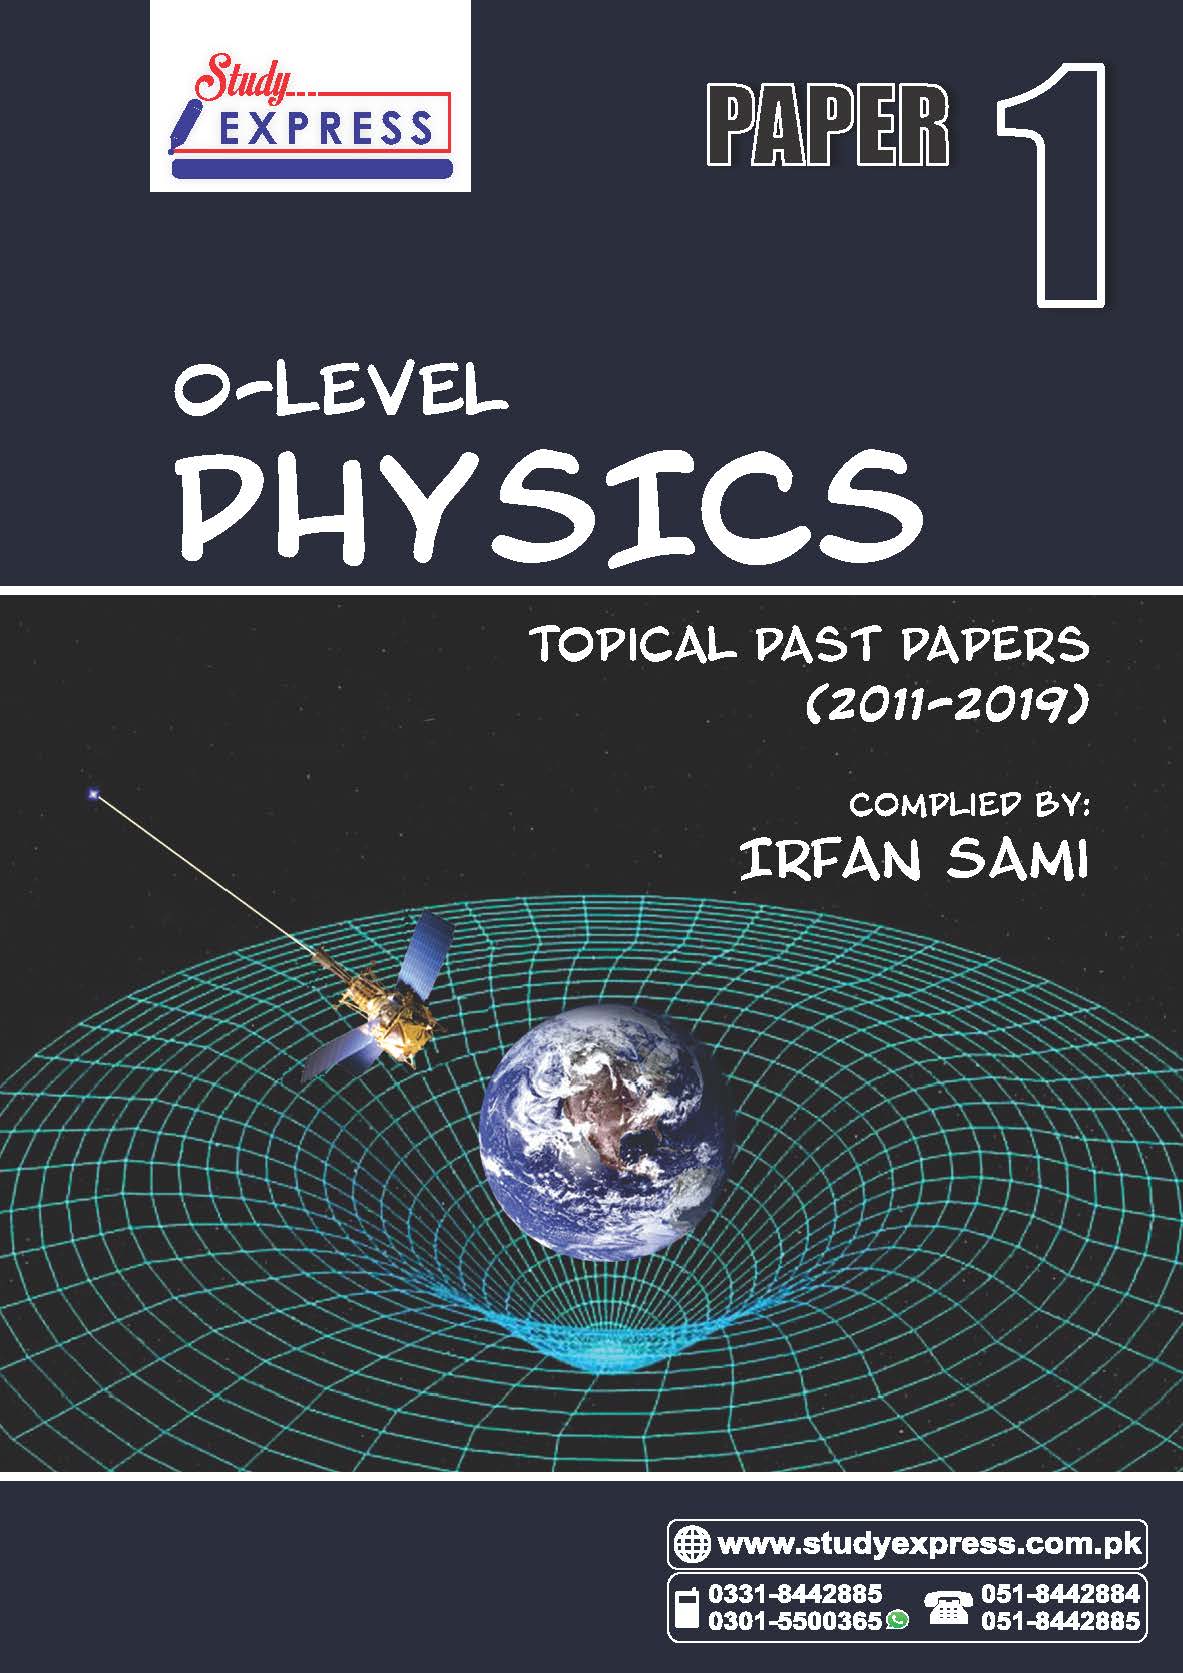 0-LEVEL PHYSICS TOPICAL PAST PAPERS (2011-2019) PAPER 1 COMPILED BY: IRFAN SAMI